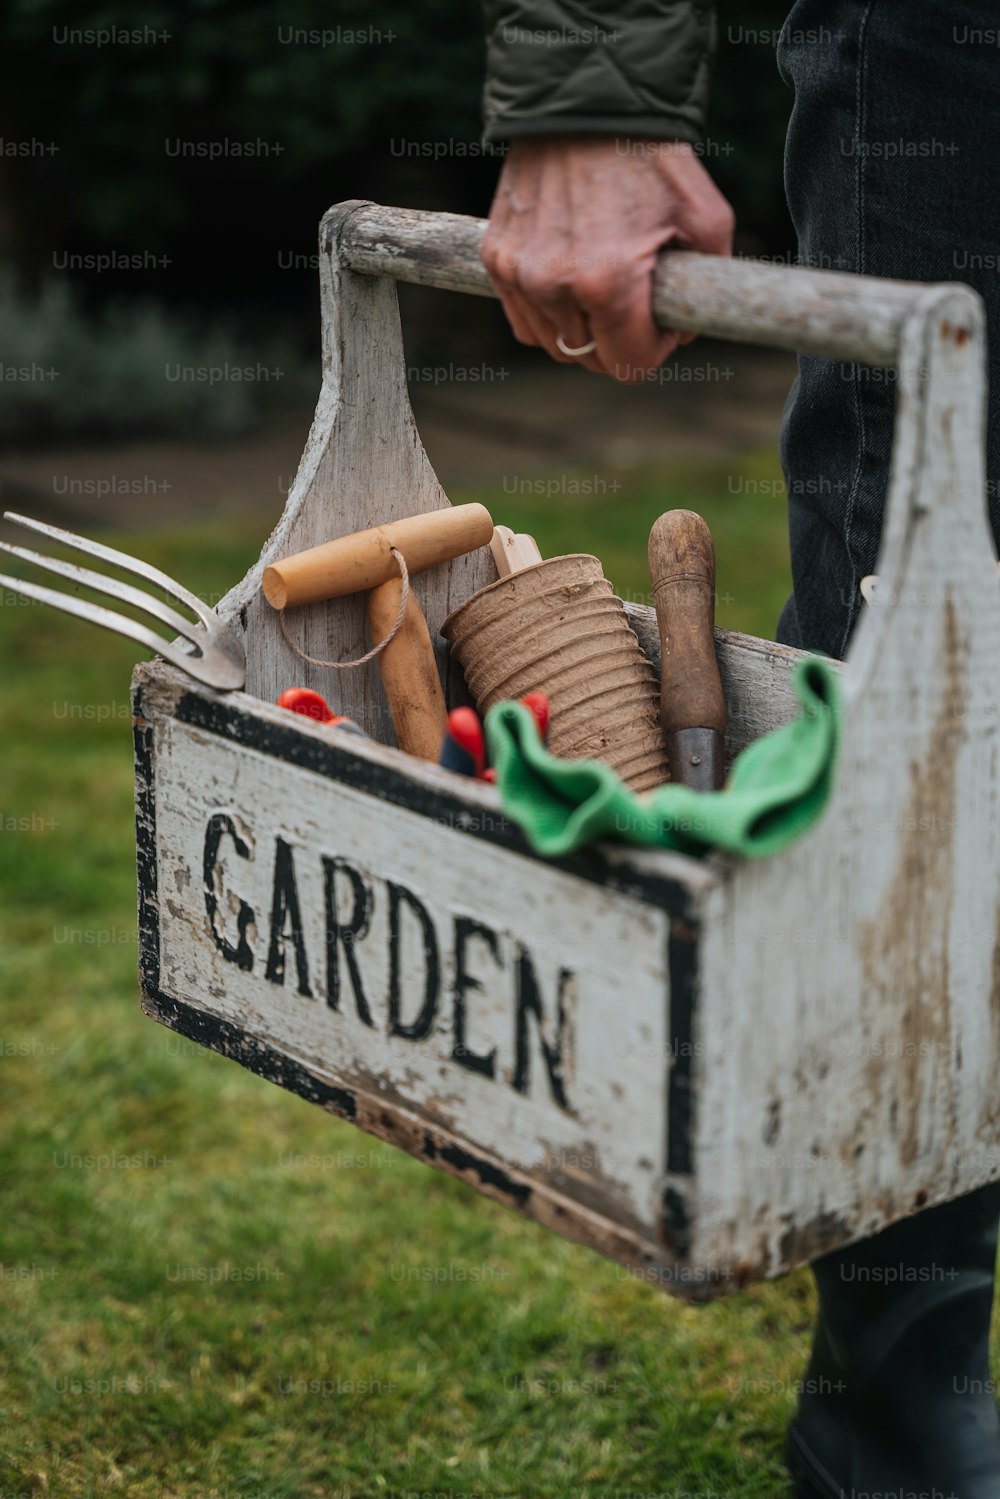 a person holding a garden box full of gardening tools